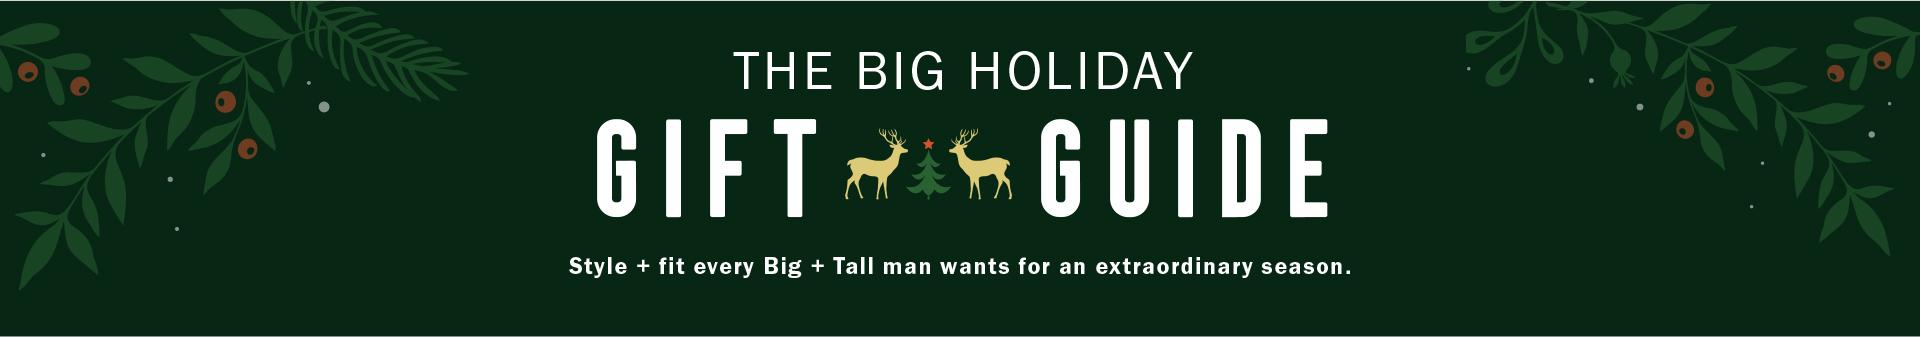 THE BIG HOLIDAY GIFT GUIDE | EVERYTHING HE NEEDS FOR AN EXTRAORDINARY SEASON.